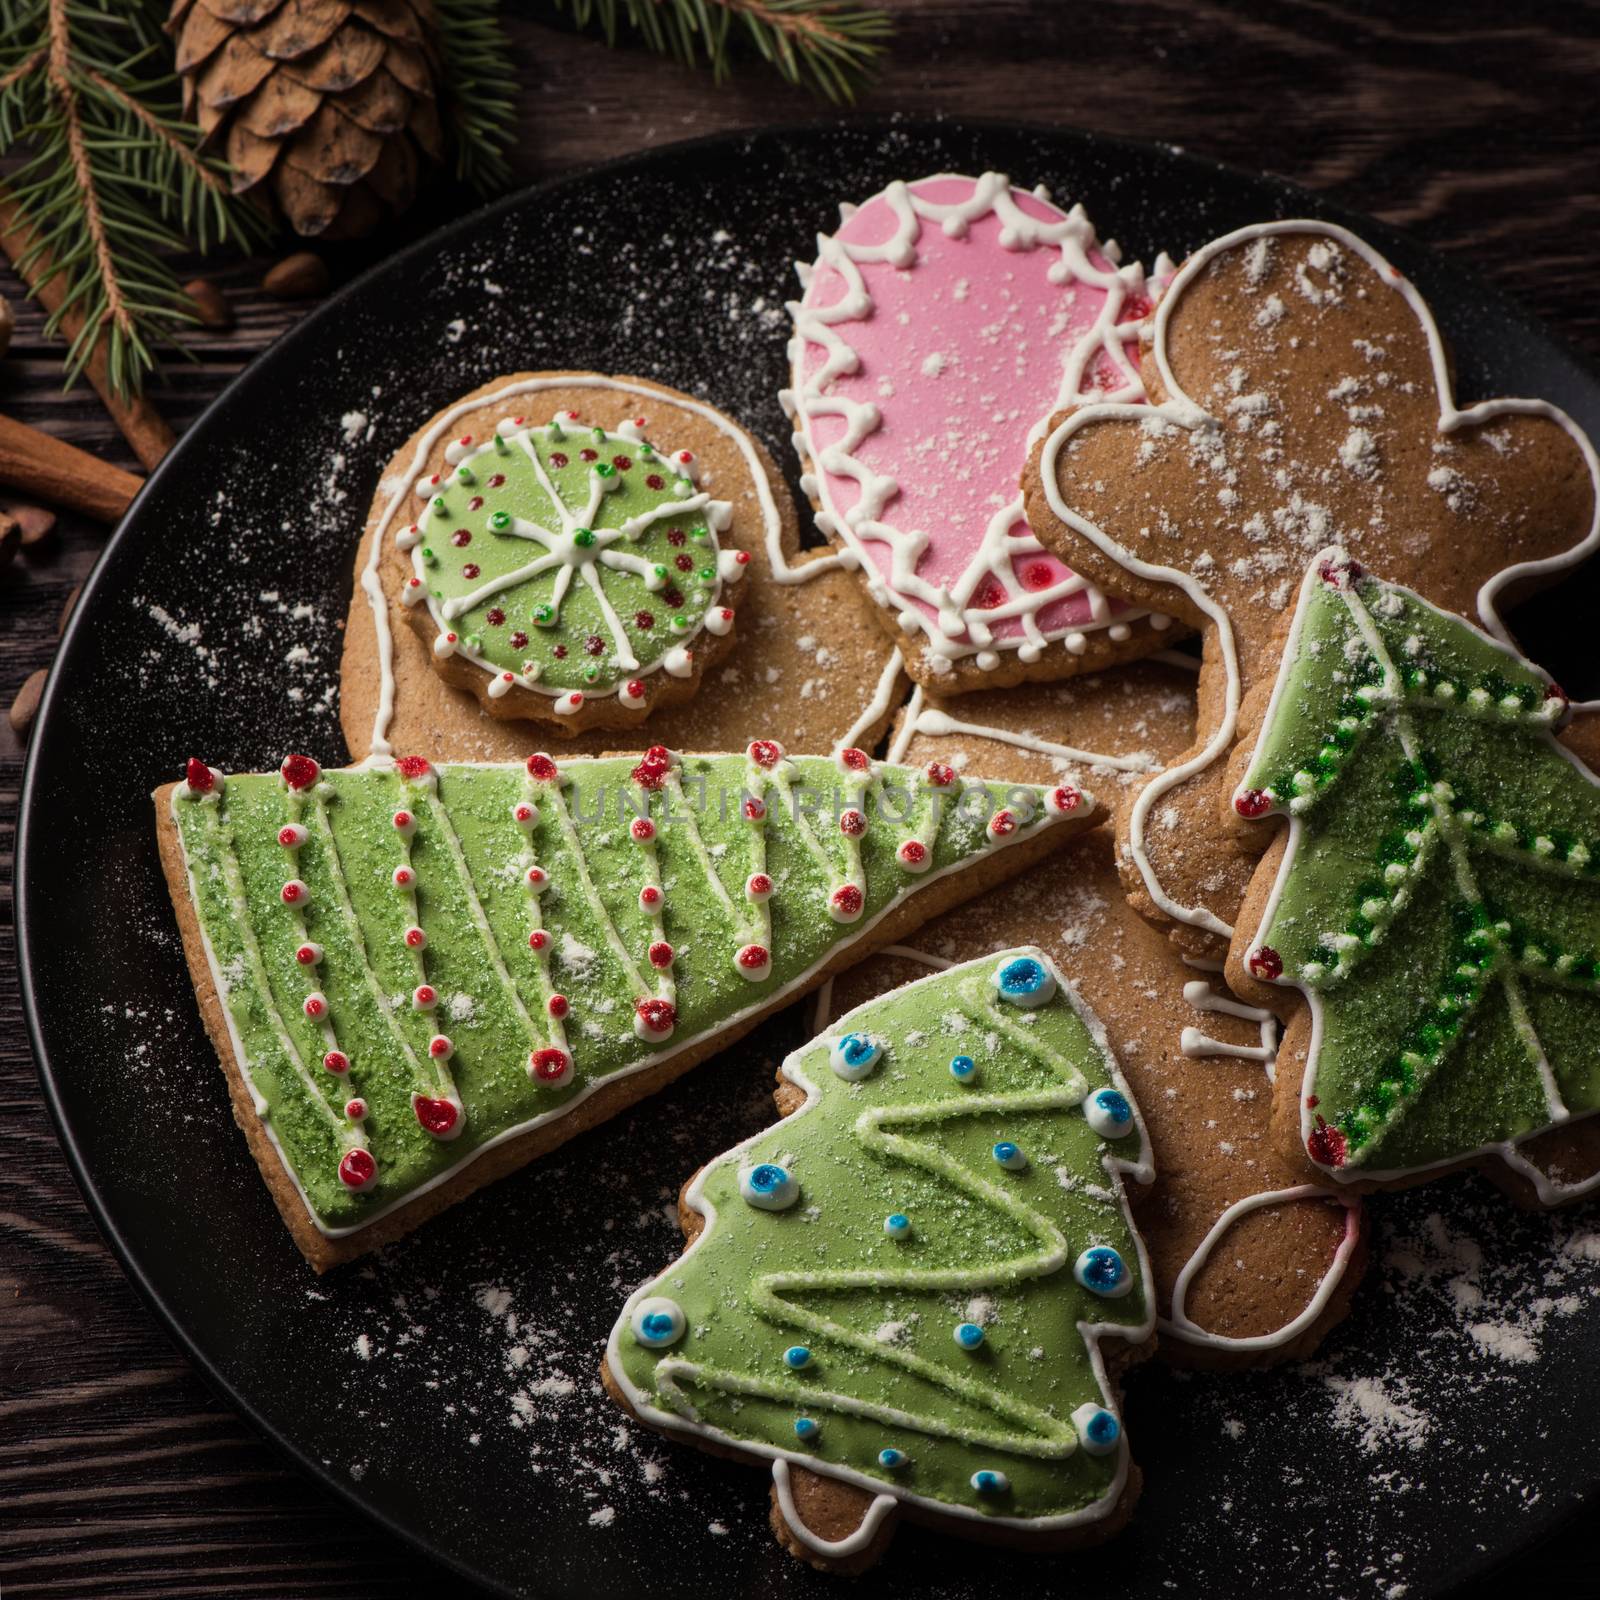 New year homemade gingerbread by rusak